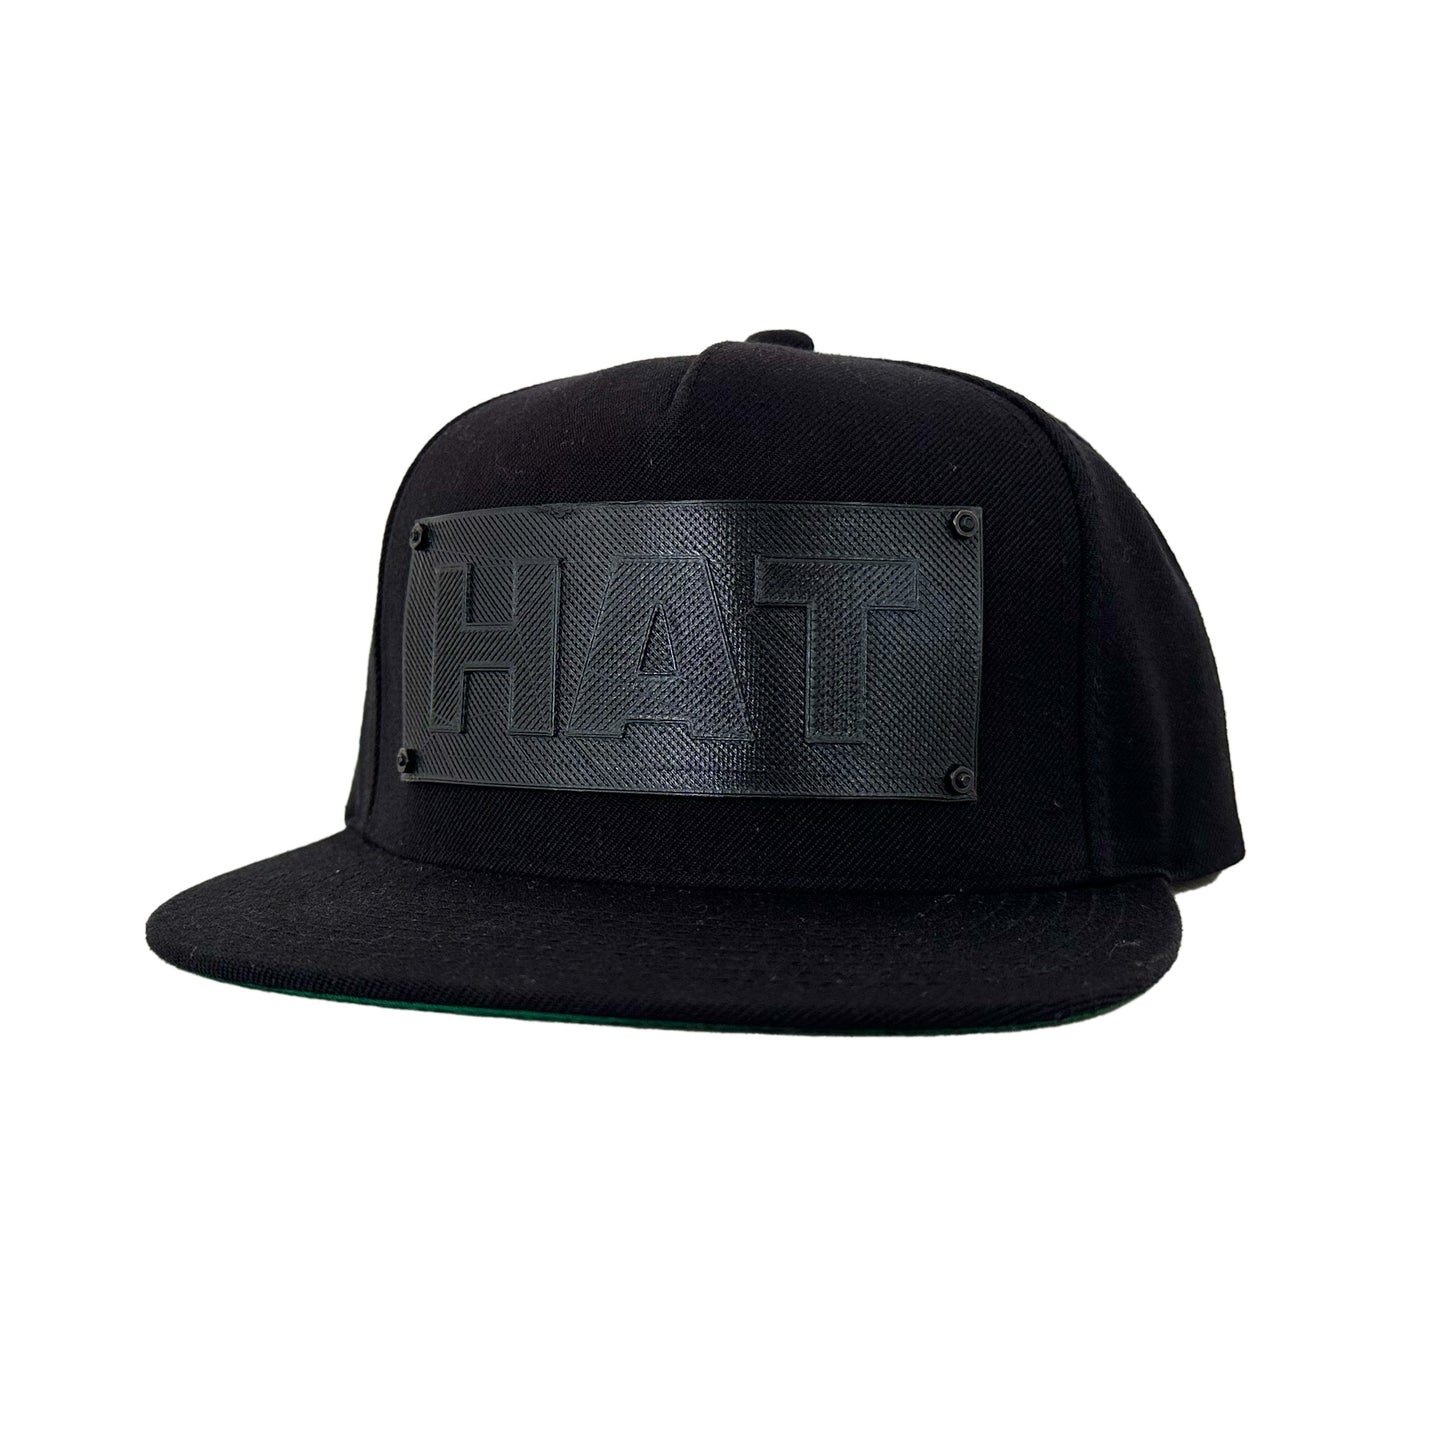 A black snapback baseball hat with a black logo panel that says"HAT".